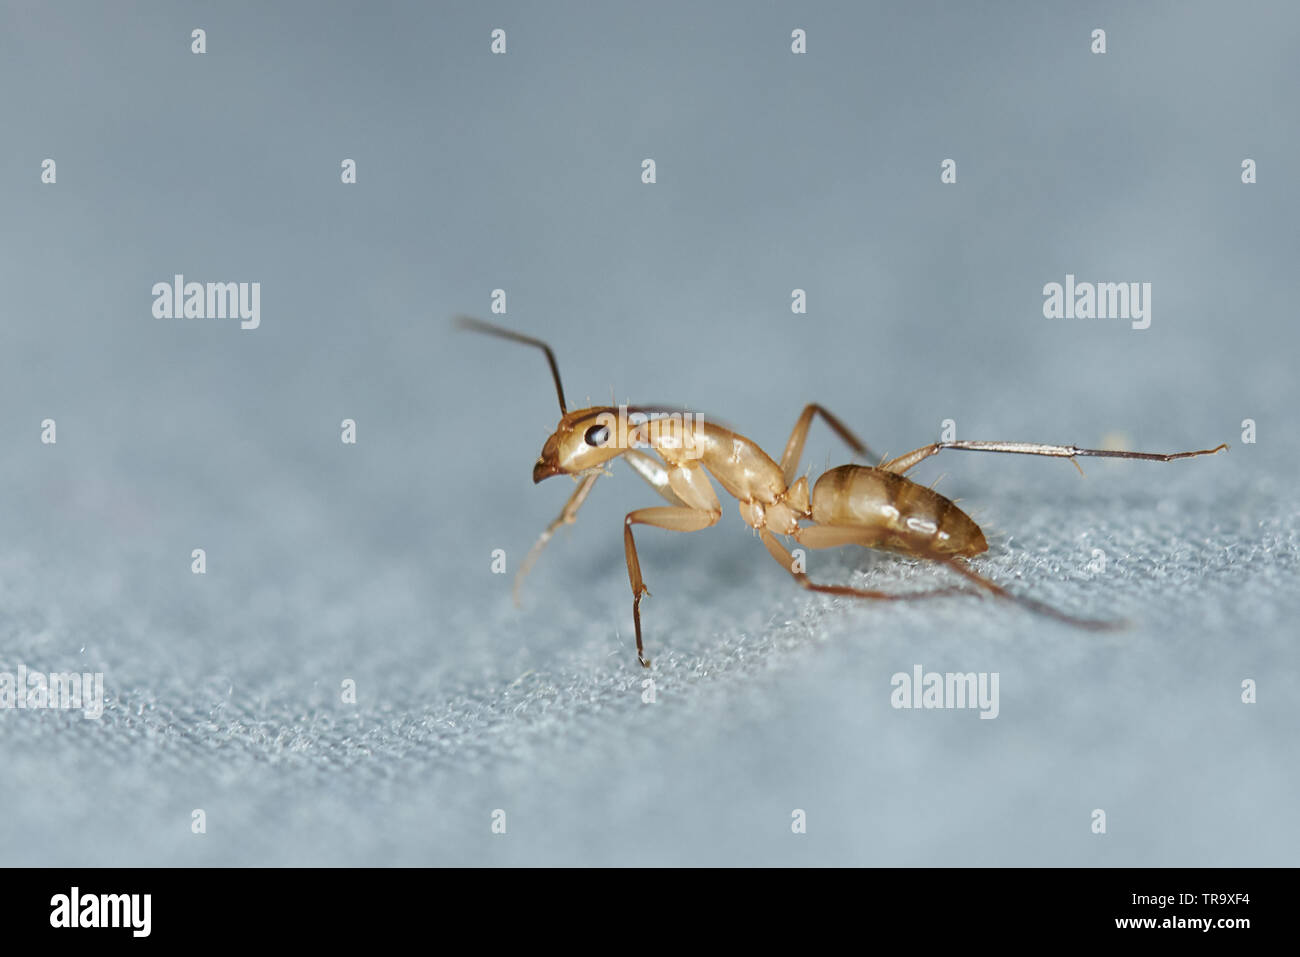 One brown worker ant close up view on blurred blue background Stock Photo